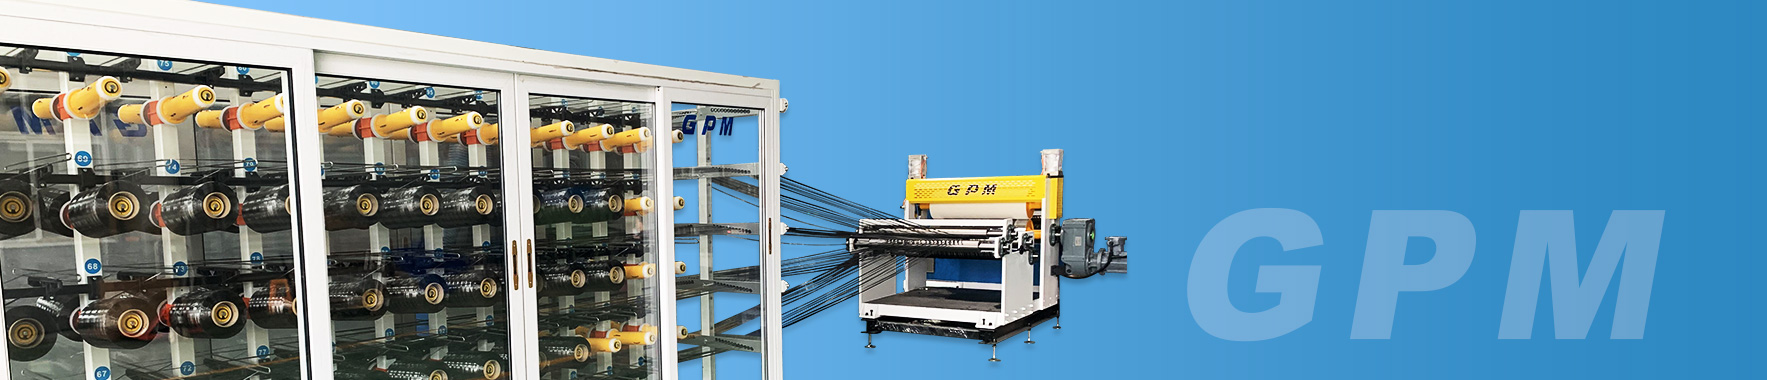 Double belt press for Continuous thermoplastic honeycomb sandwich panel process technology；